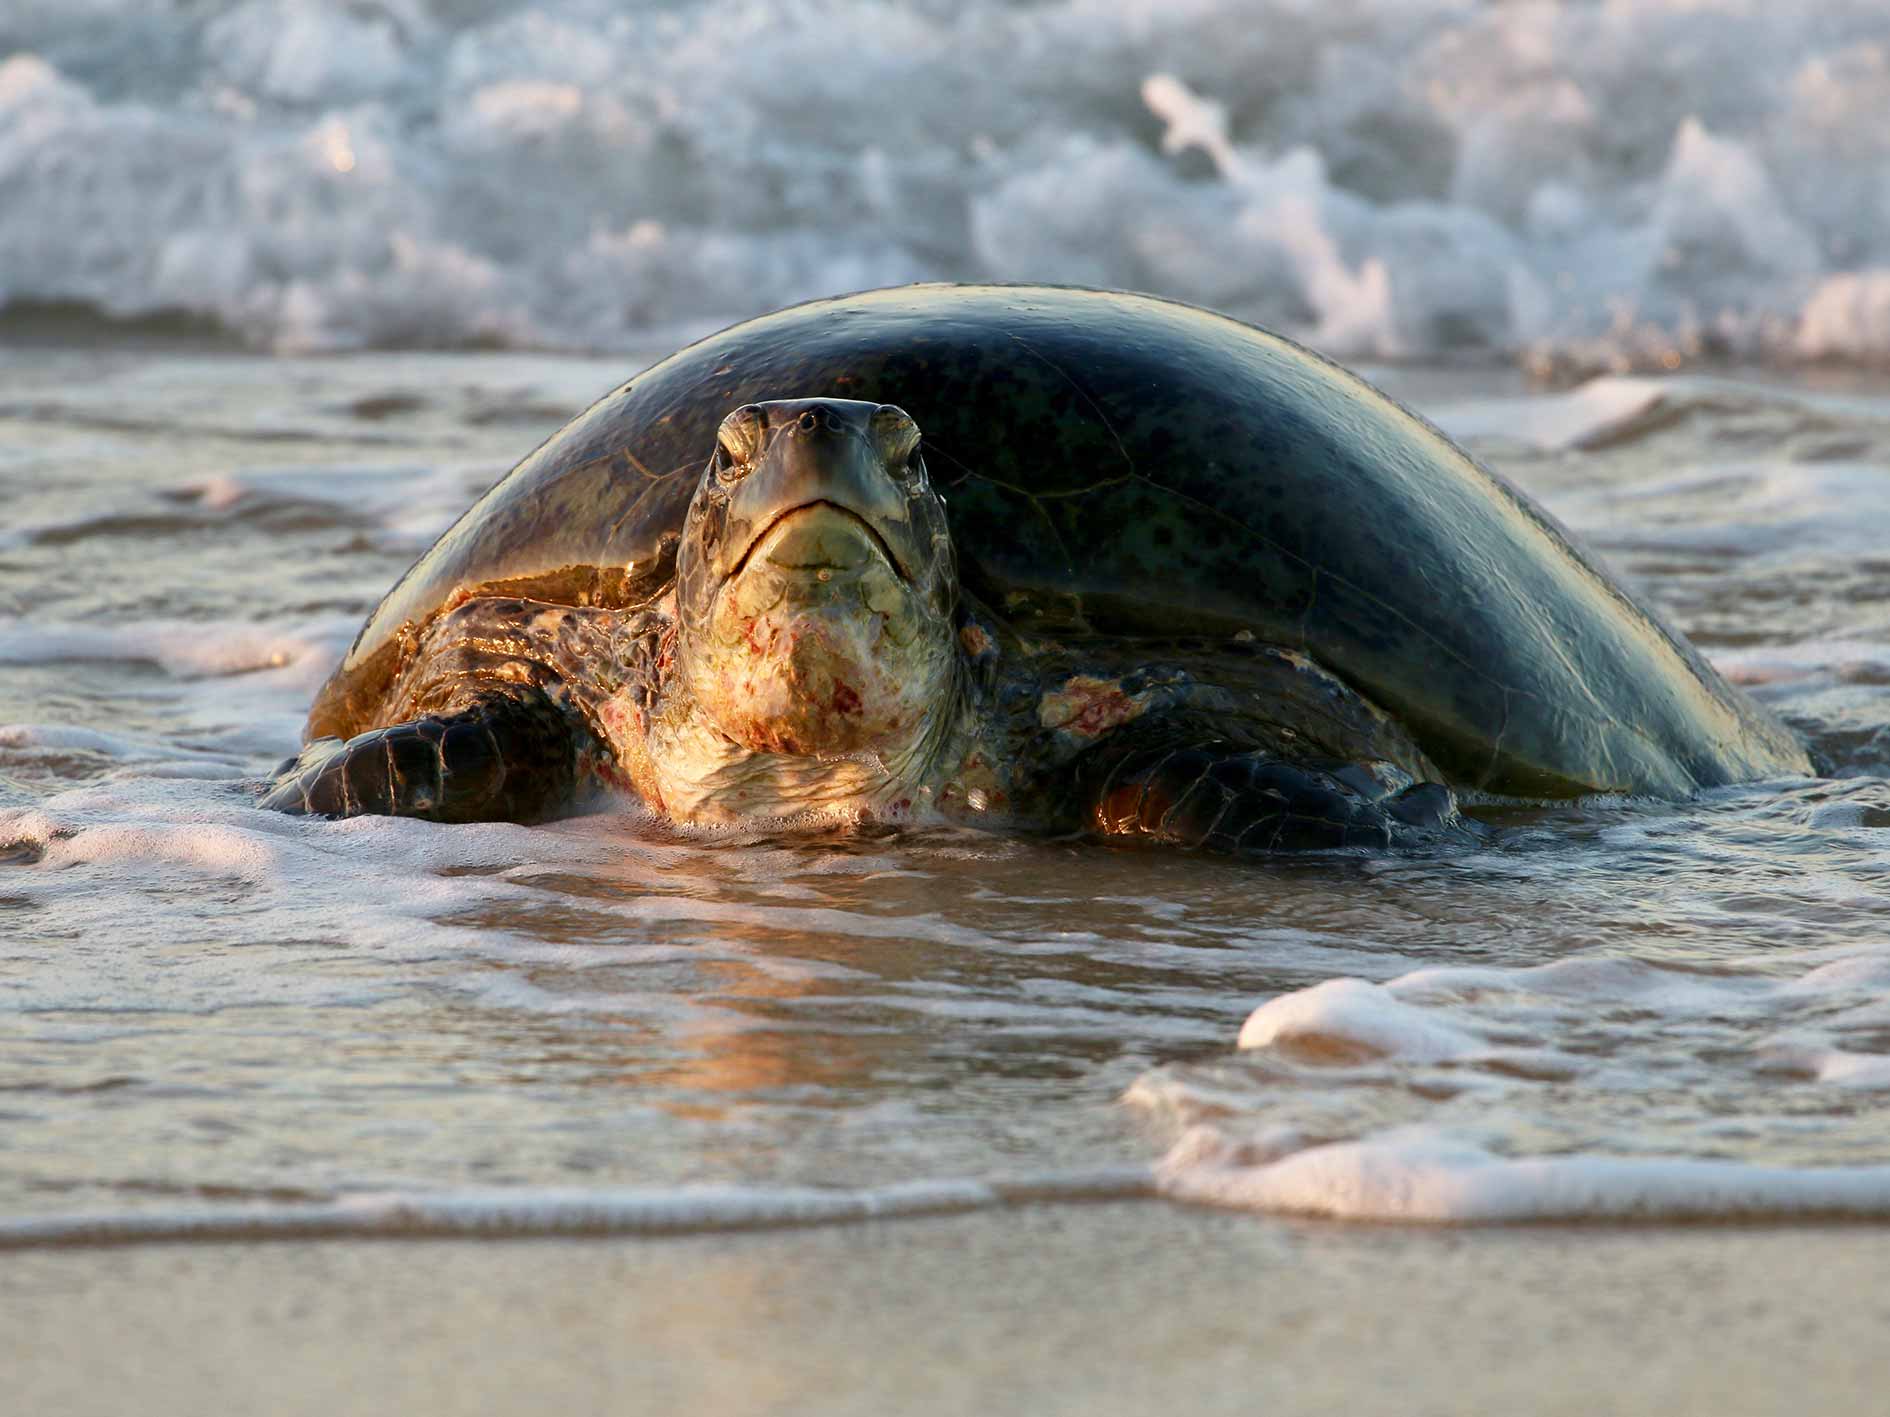 Mature turtle at waters edge, ready to make her way up the beach to nest